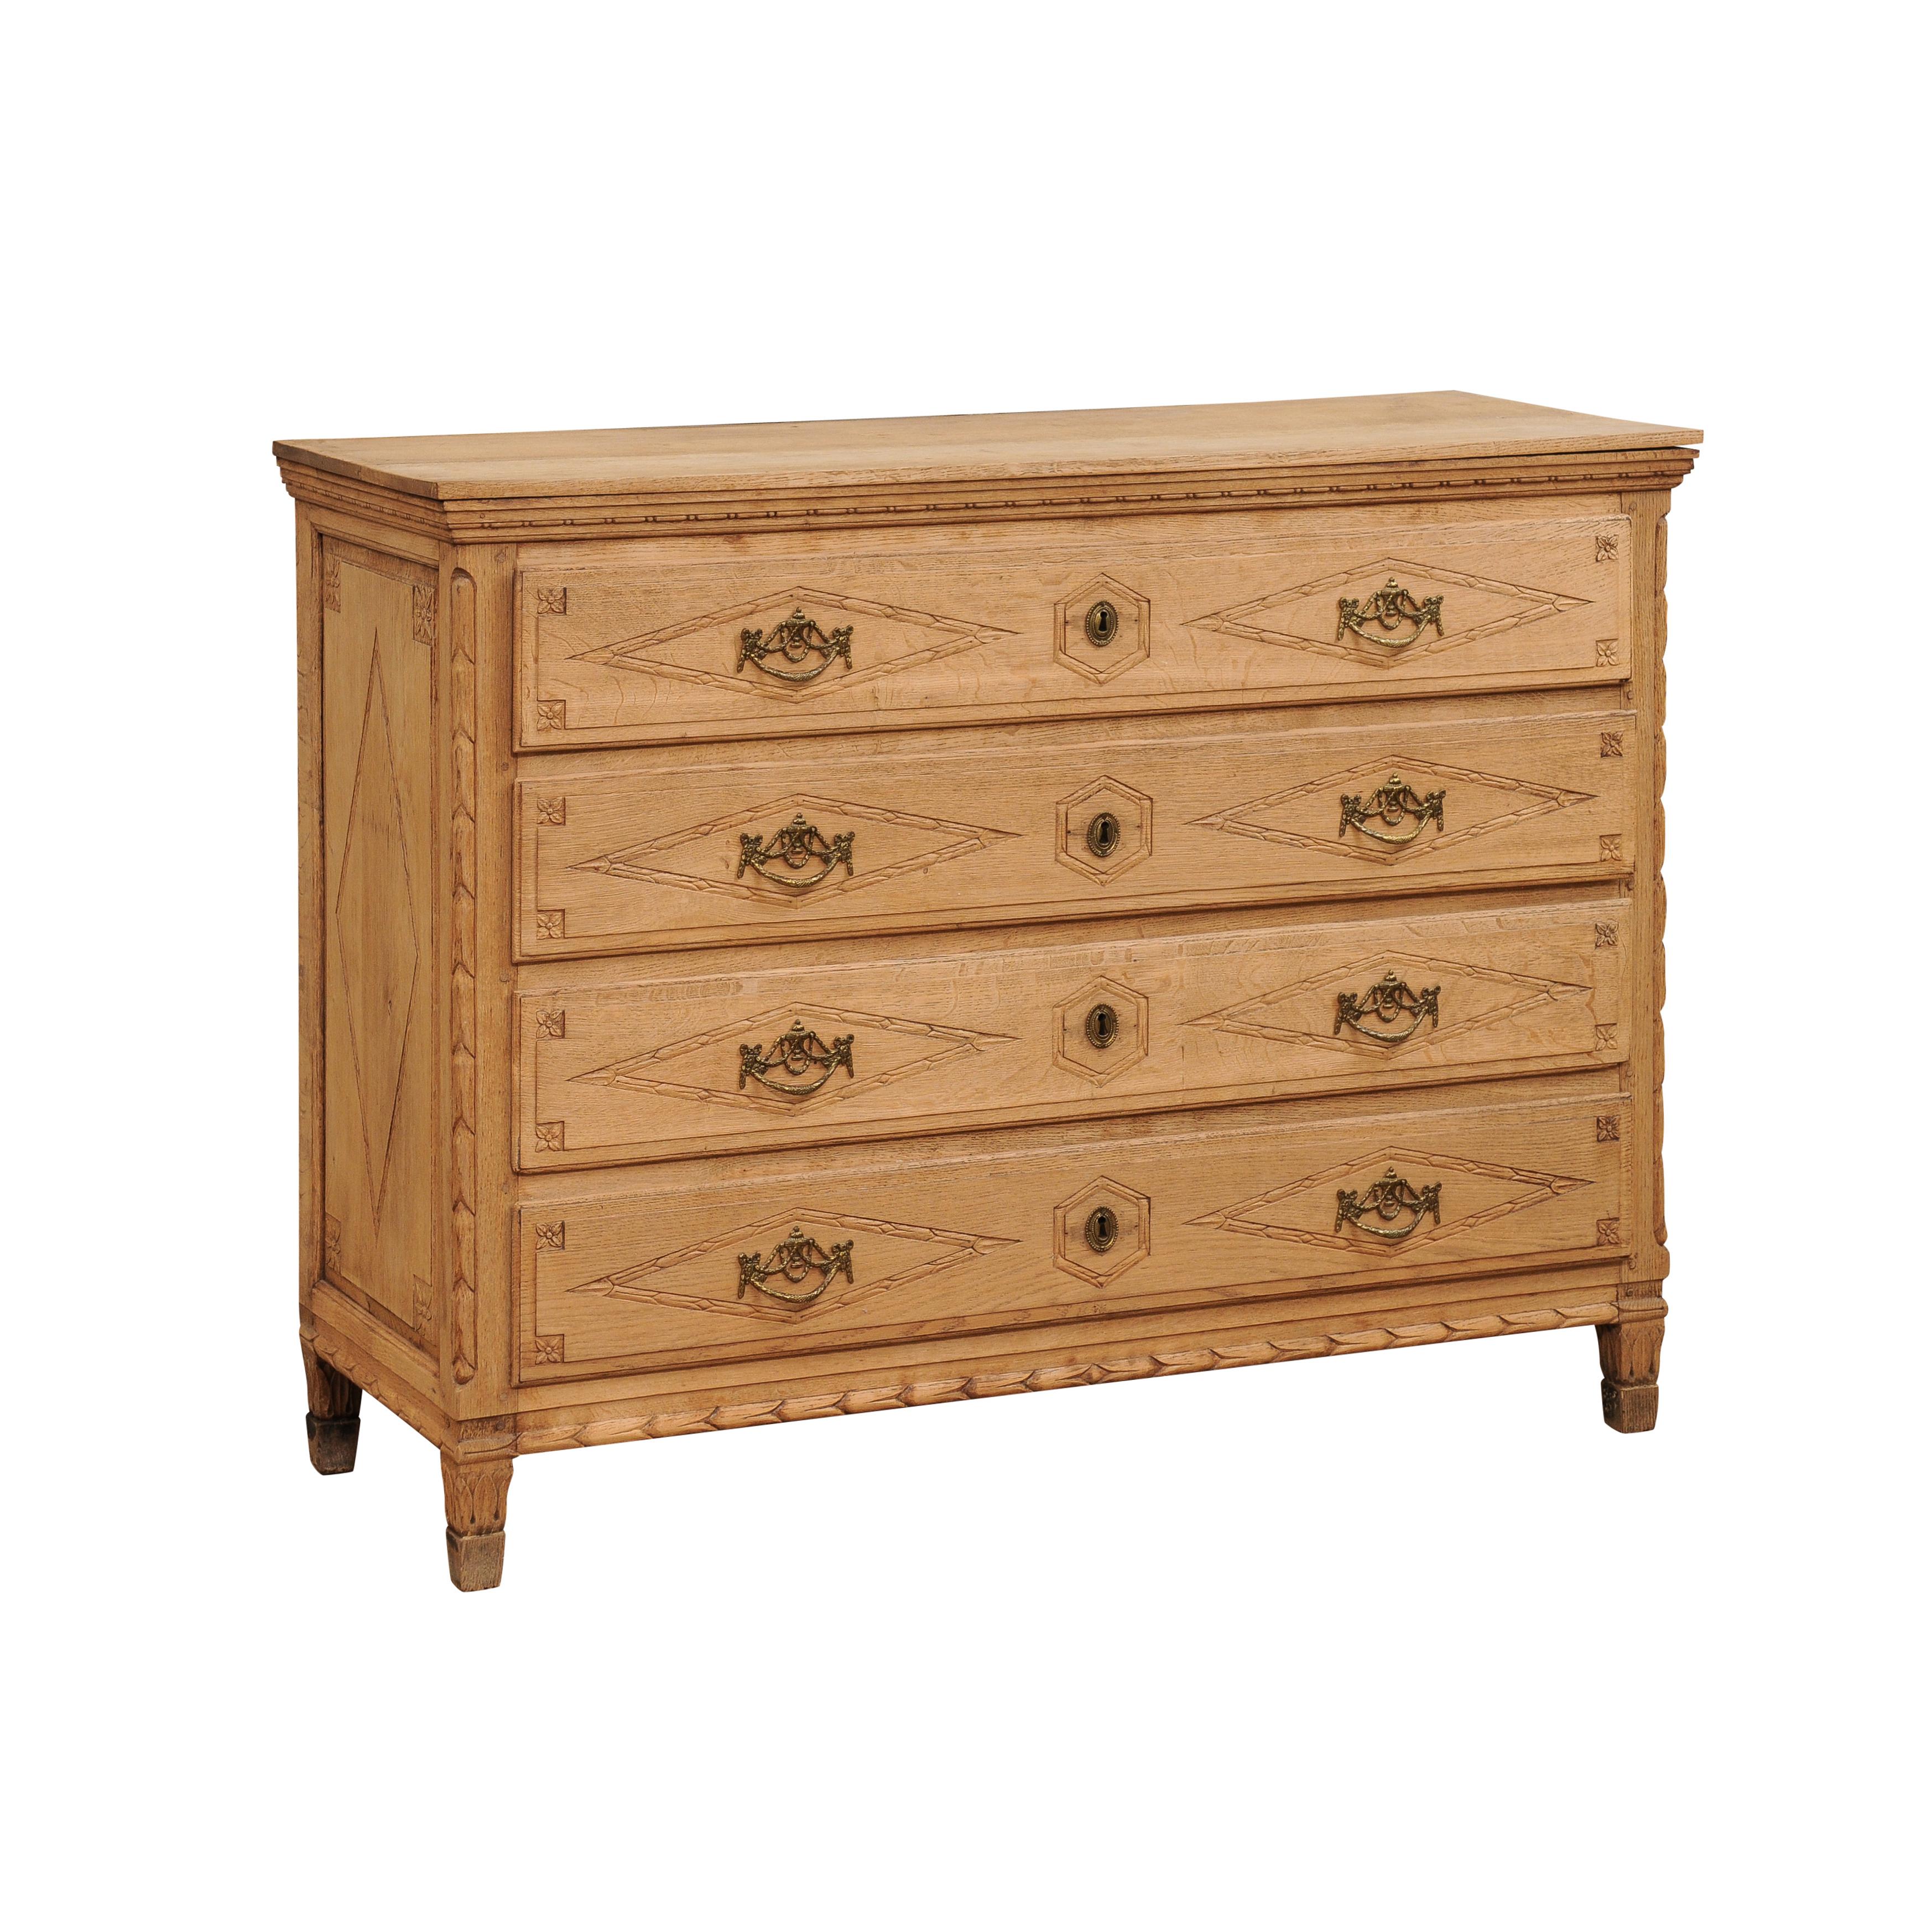 A French Louis XVI period natural oak commode circa 1790 with four geometric carved drawers. Enhance your living space with this exquisite French Louis XVI period natural oak commode from the late 18th century. Crafted with meticulous attention to